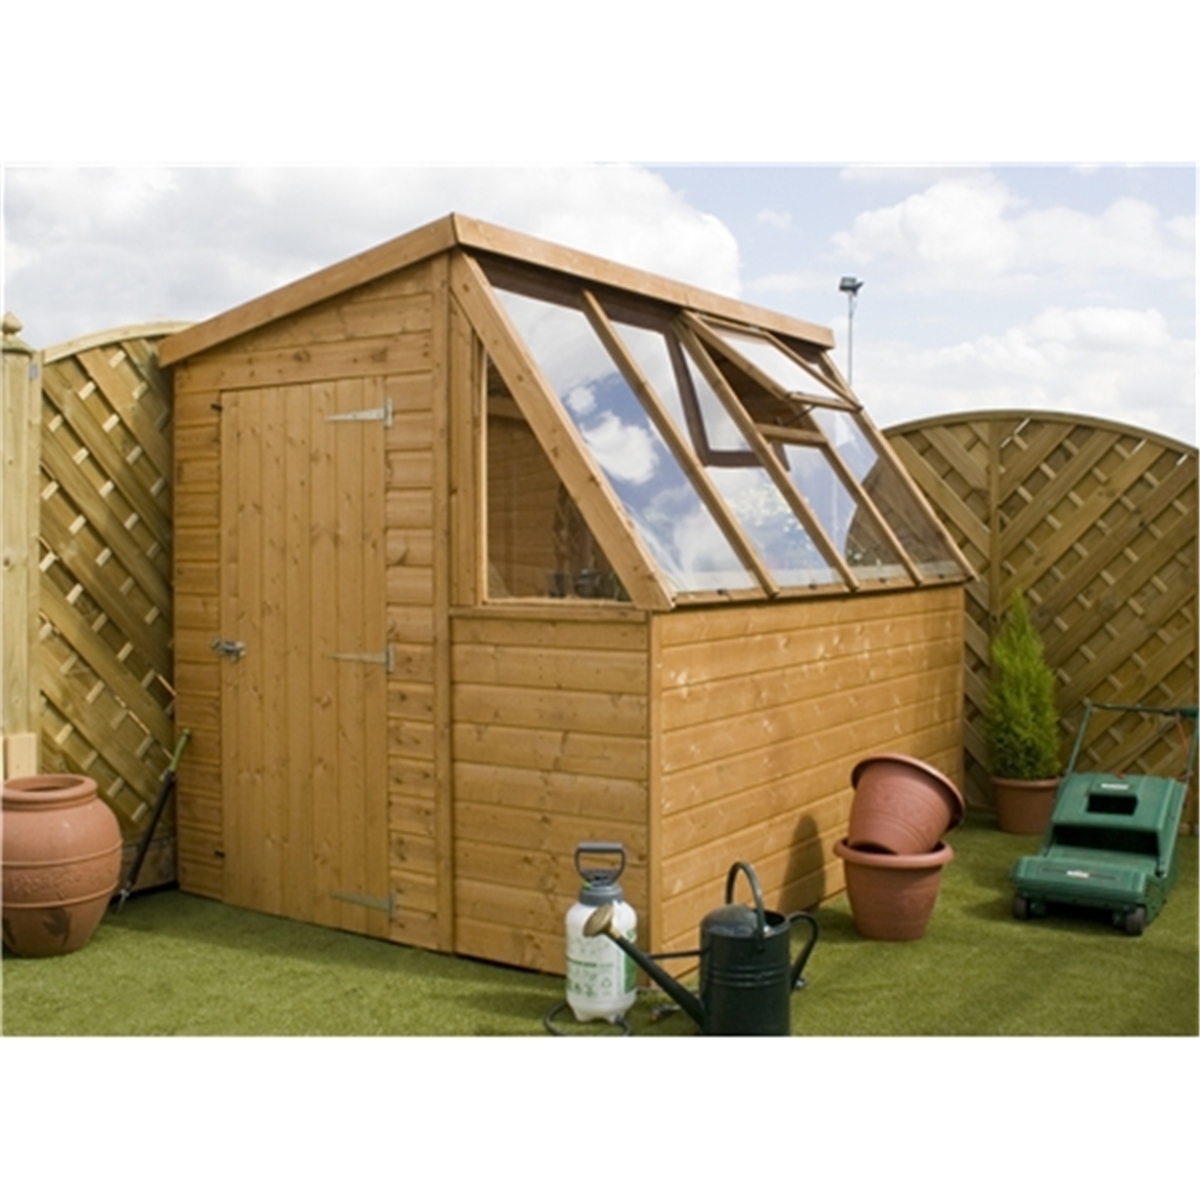 INSTALLED 8 x 6 Premier Potting Shed + Free Potting Bench (Door Can Be